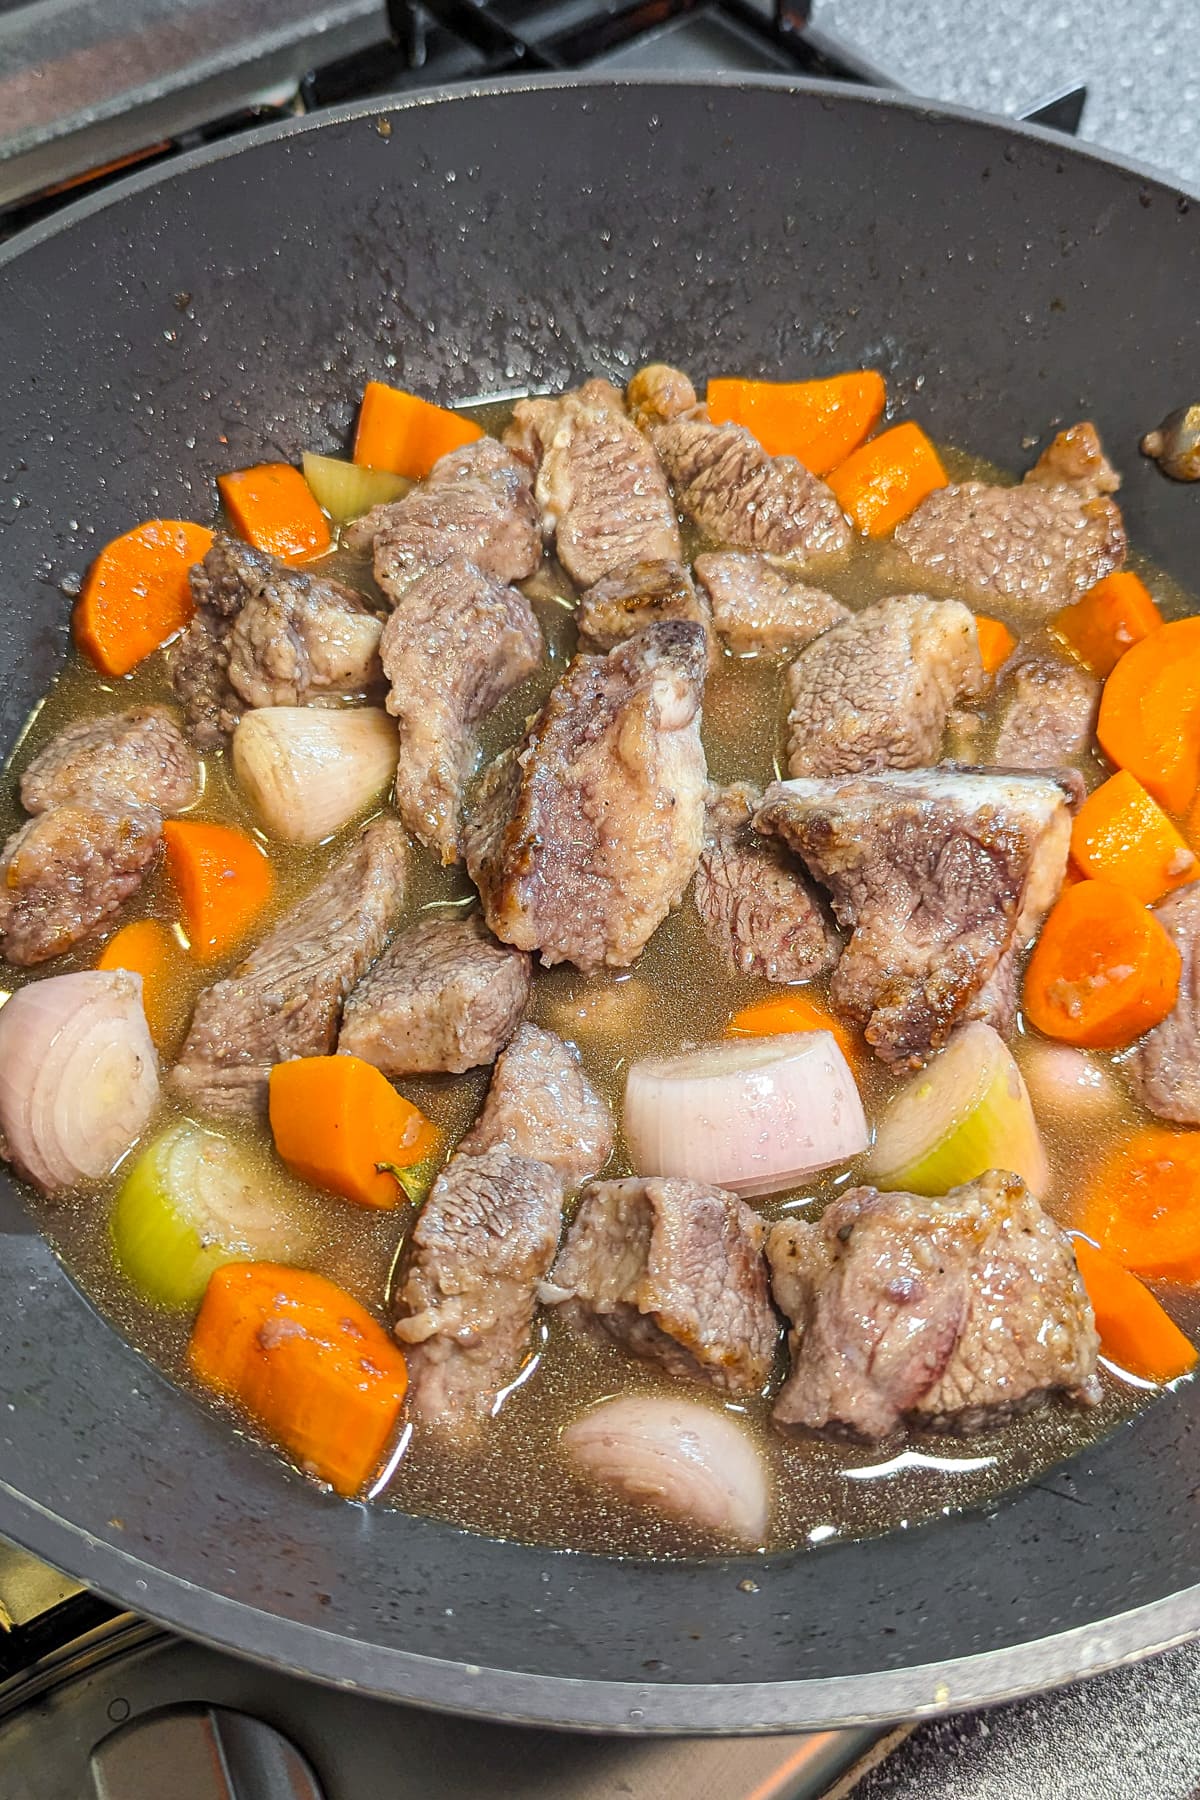 Beef stew with carrots and onions in a large wok on the stove.